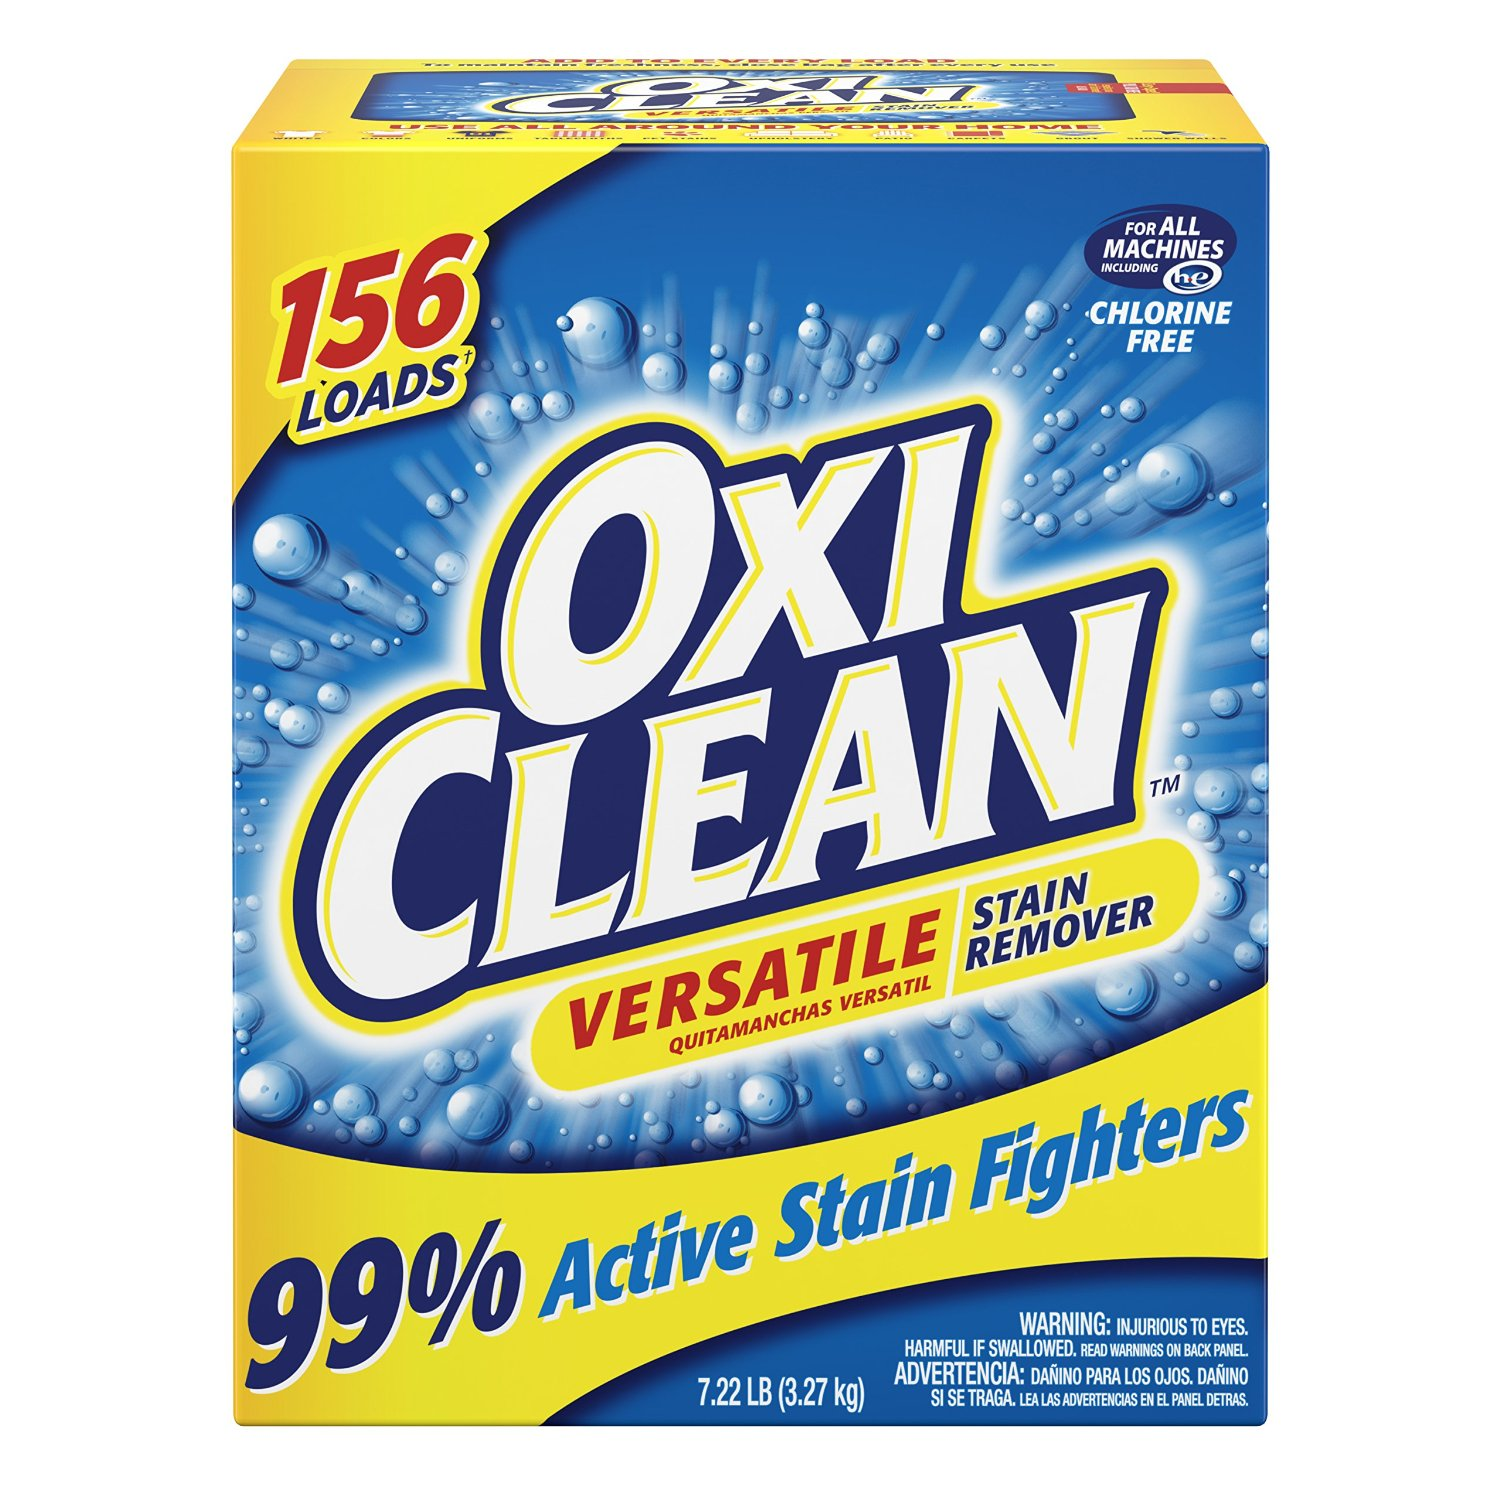 OxiClean Versatile Stain Remover (7.22lbs) Only $9.97! (Reg $11.23)